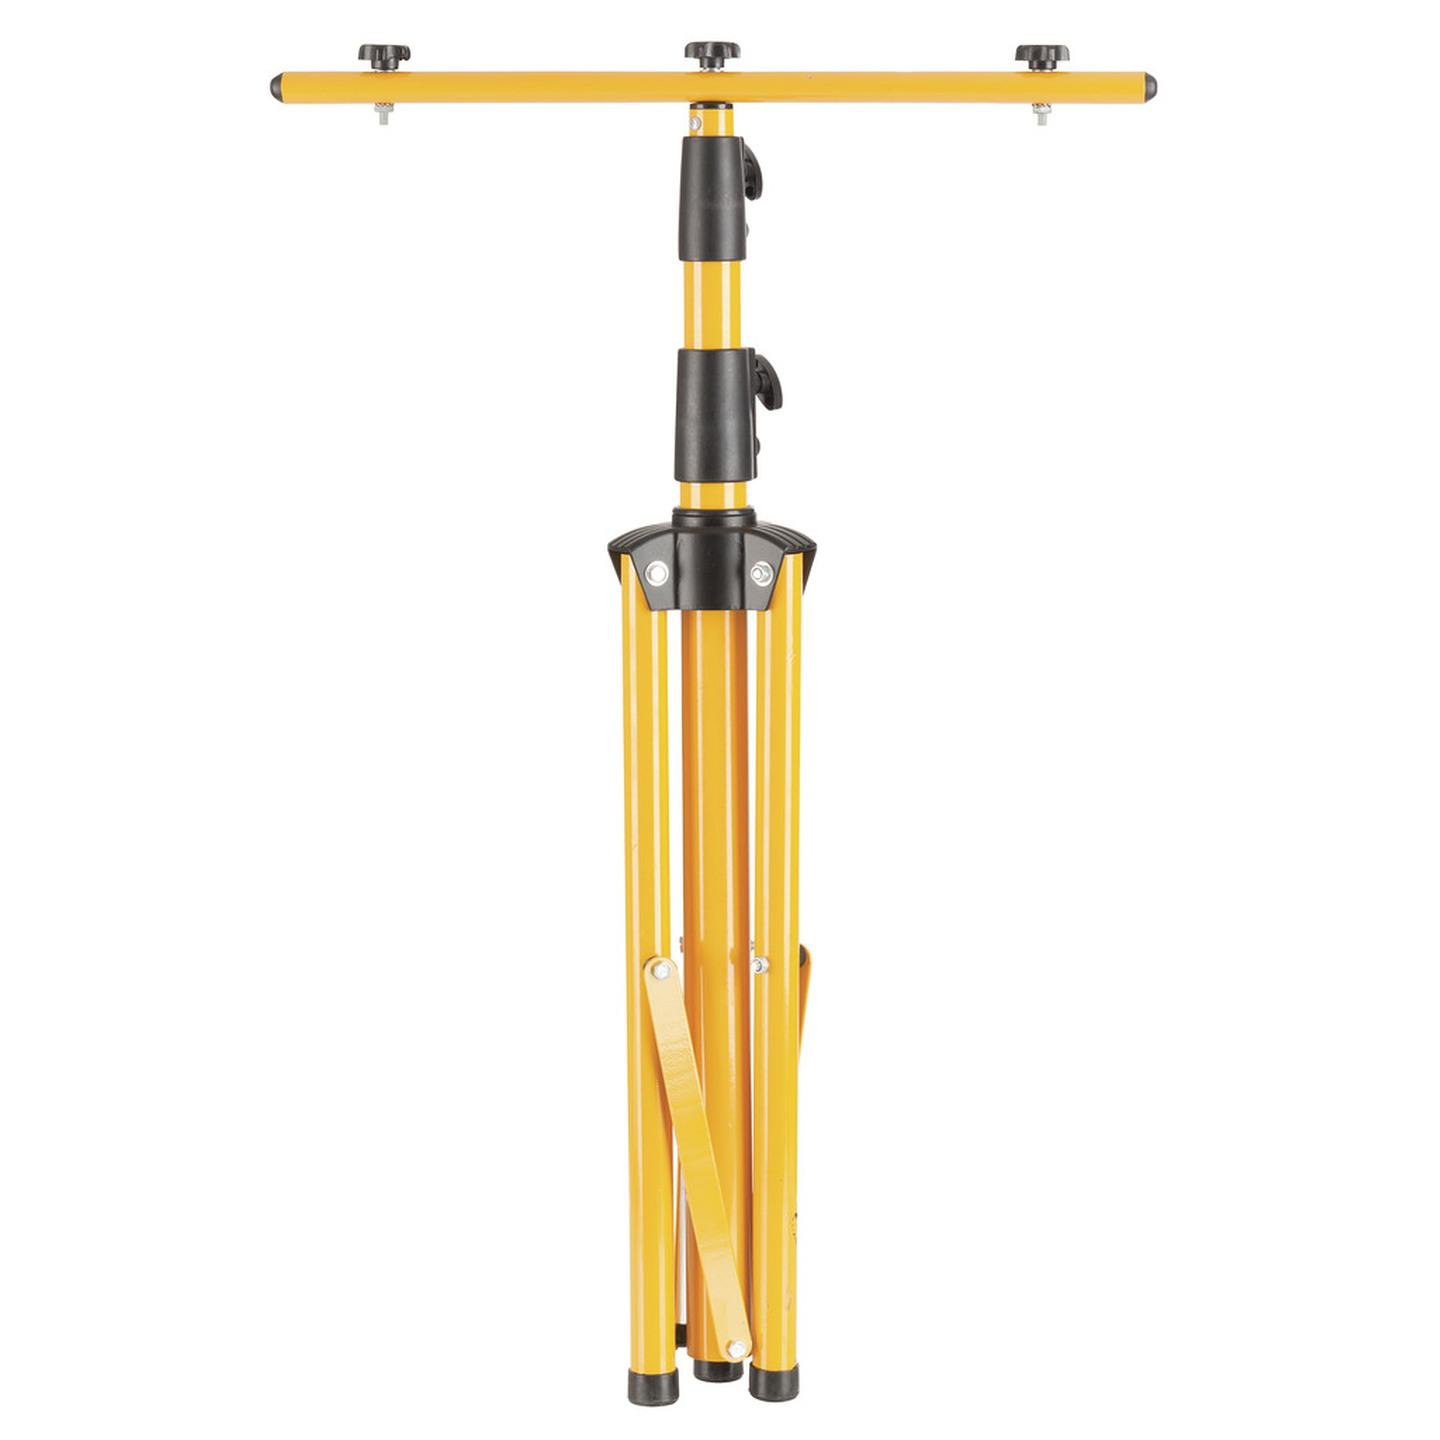 Floodlight Tripod Stand with T-Bar